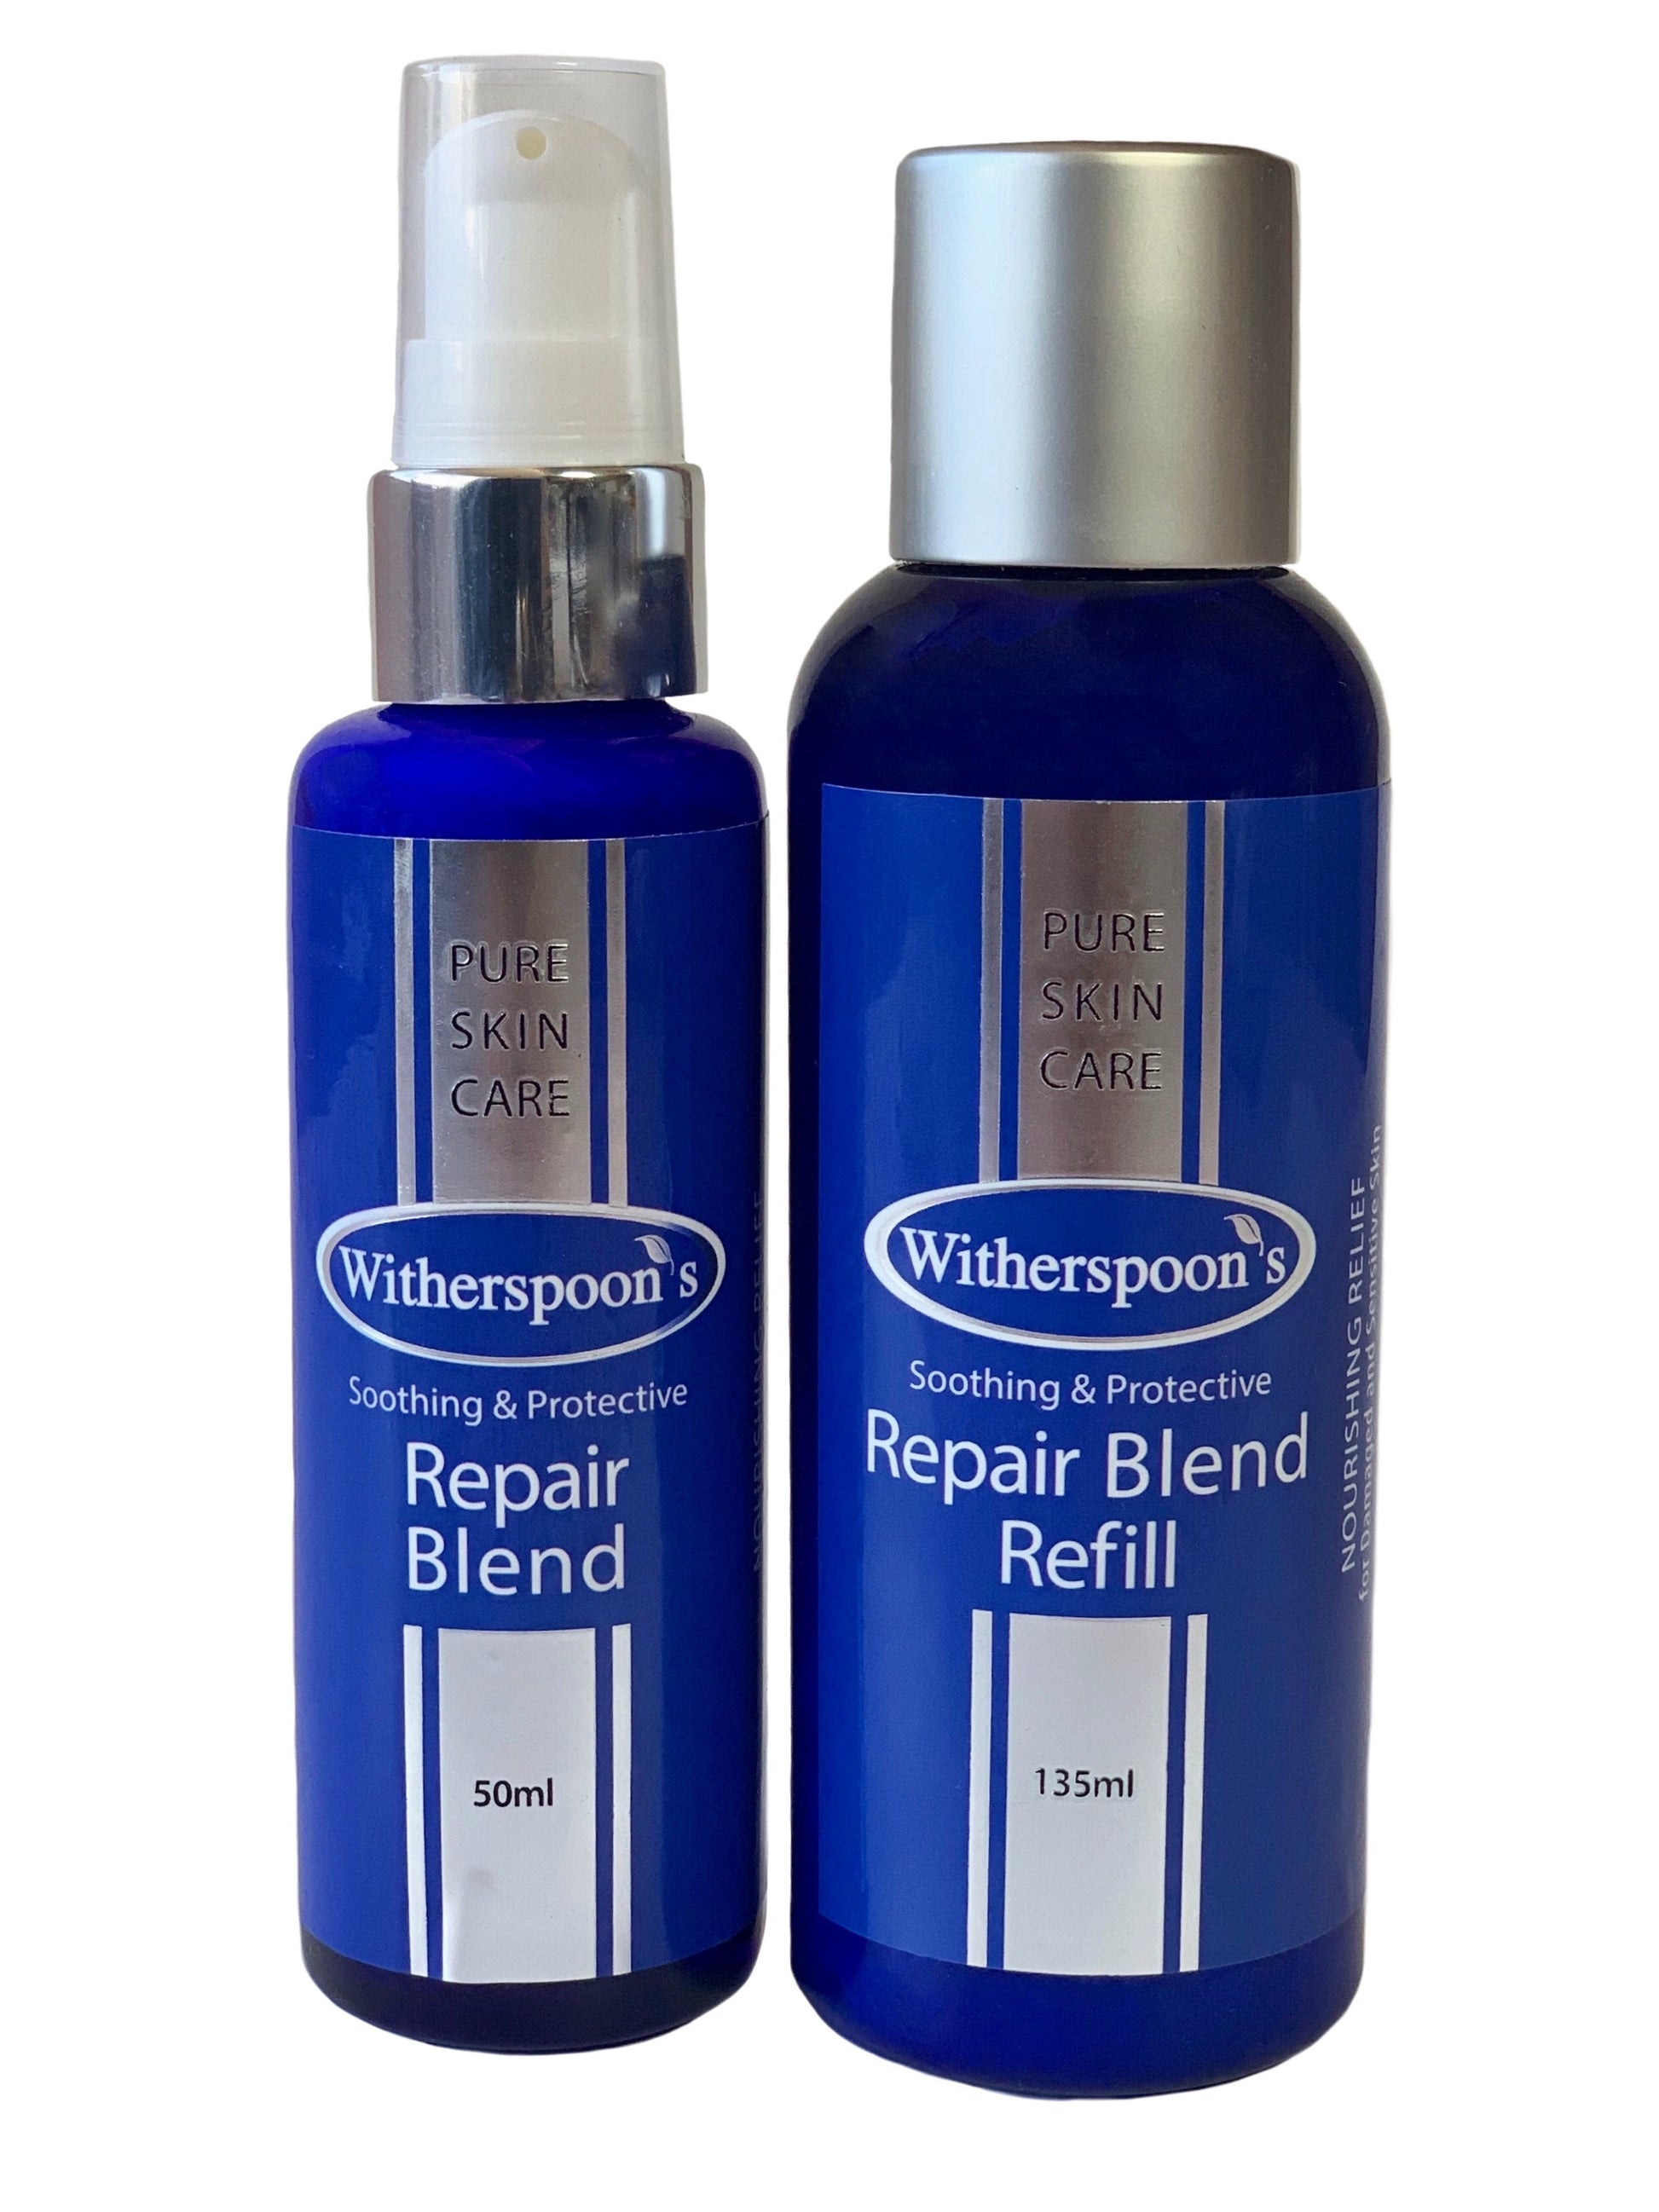 Witherspoon's Repair Blend. Two sizes 50ml and 135ml. Bottles are blue. Can be used on rashes, eczema, dermatitis, cuts, scrapes, bruises, swelling, insect bites, stitches, sores of all kinds, acne, chapped or cracked skin. It may also be added to clean dressings or as a natural substitute for Cortisone creams. 